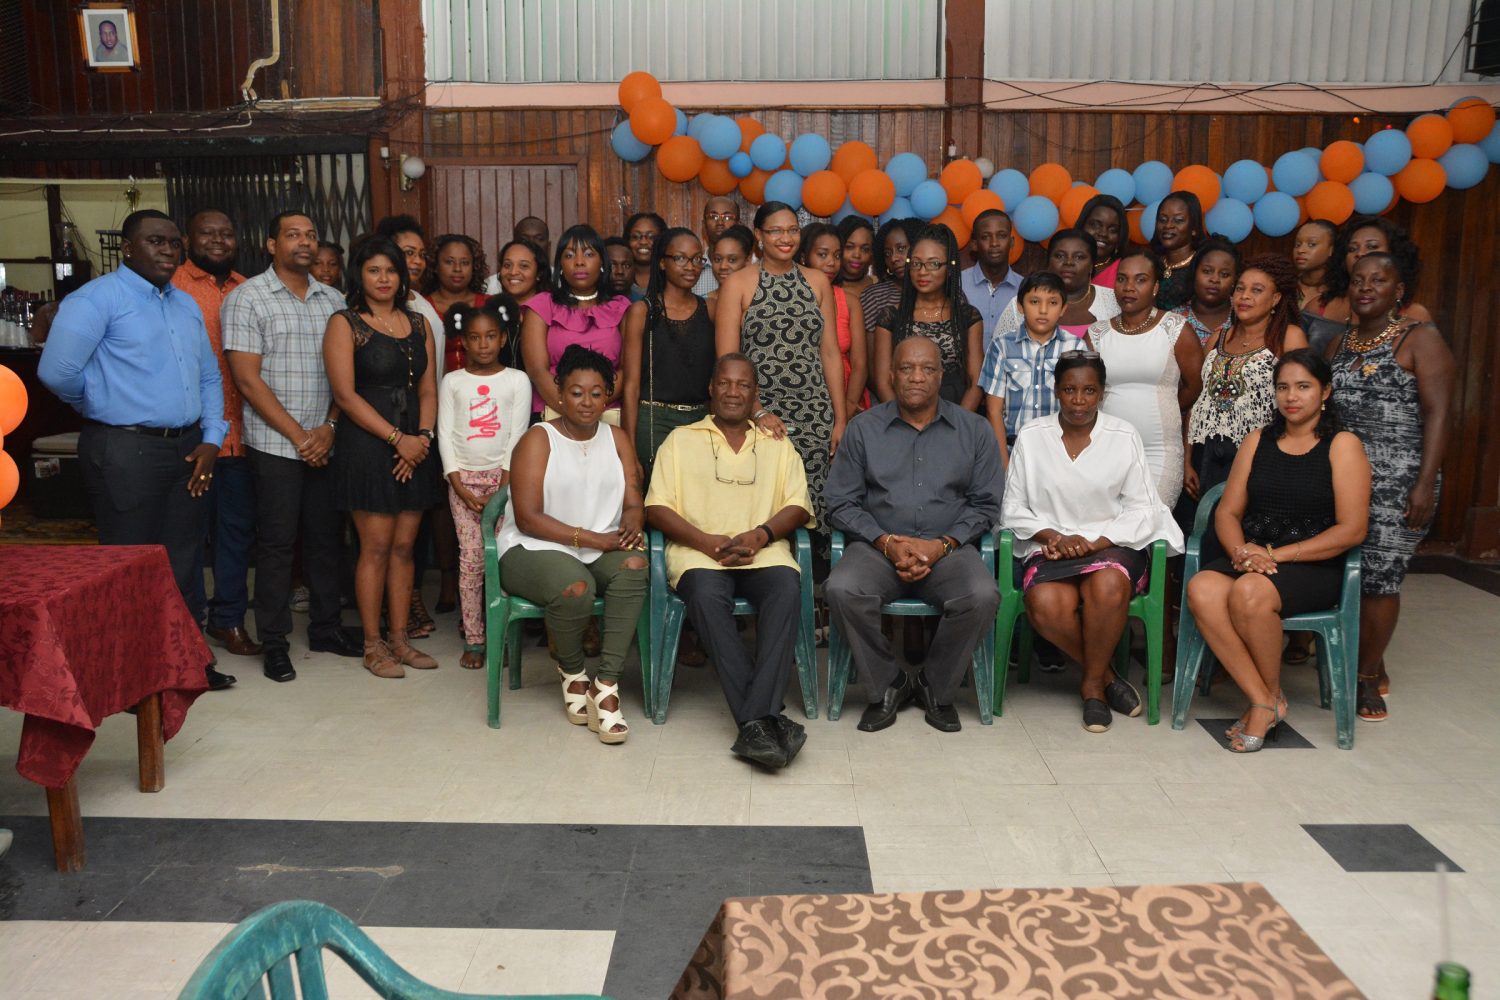 Minister of State, Joseph Harmon (seated centre) with the attendees at the event. (Ministry of the Presidency photo)